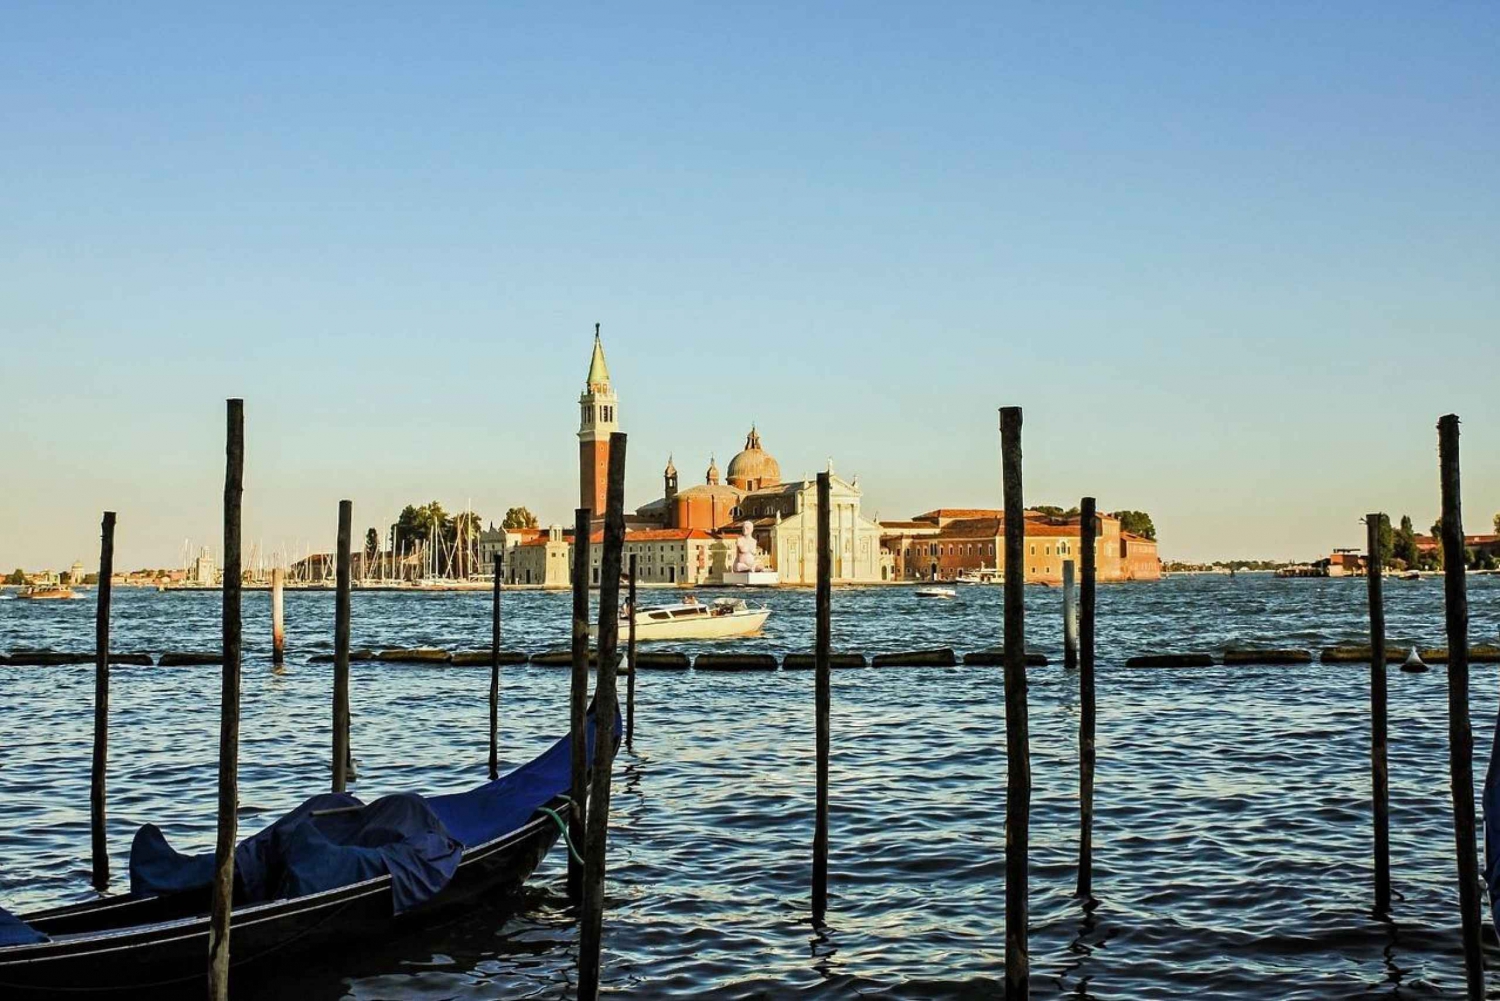 Venice: Doge's Palace and Basilica Skip-the-Line Guided Tour